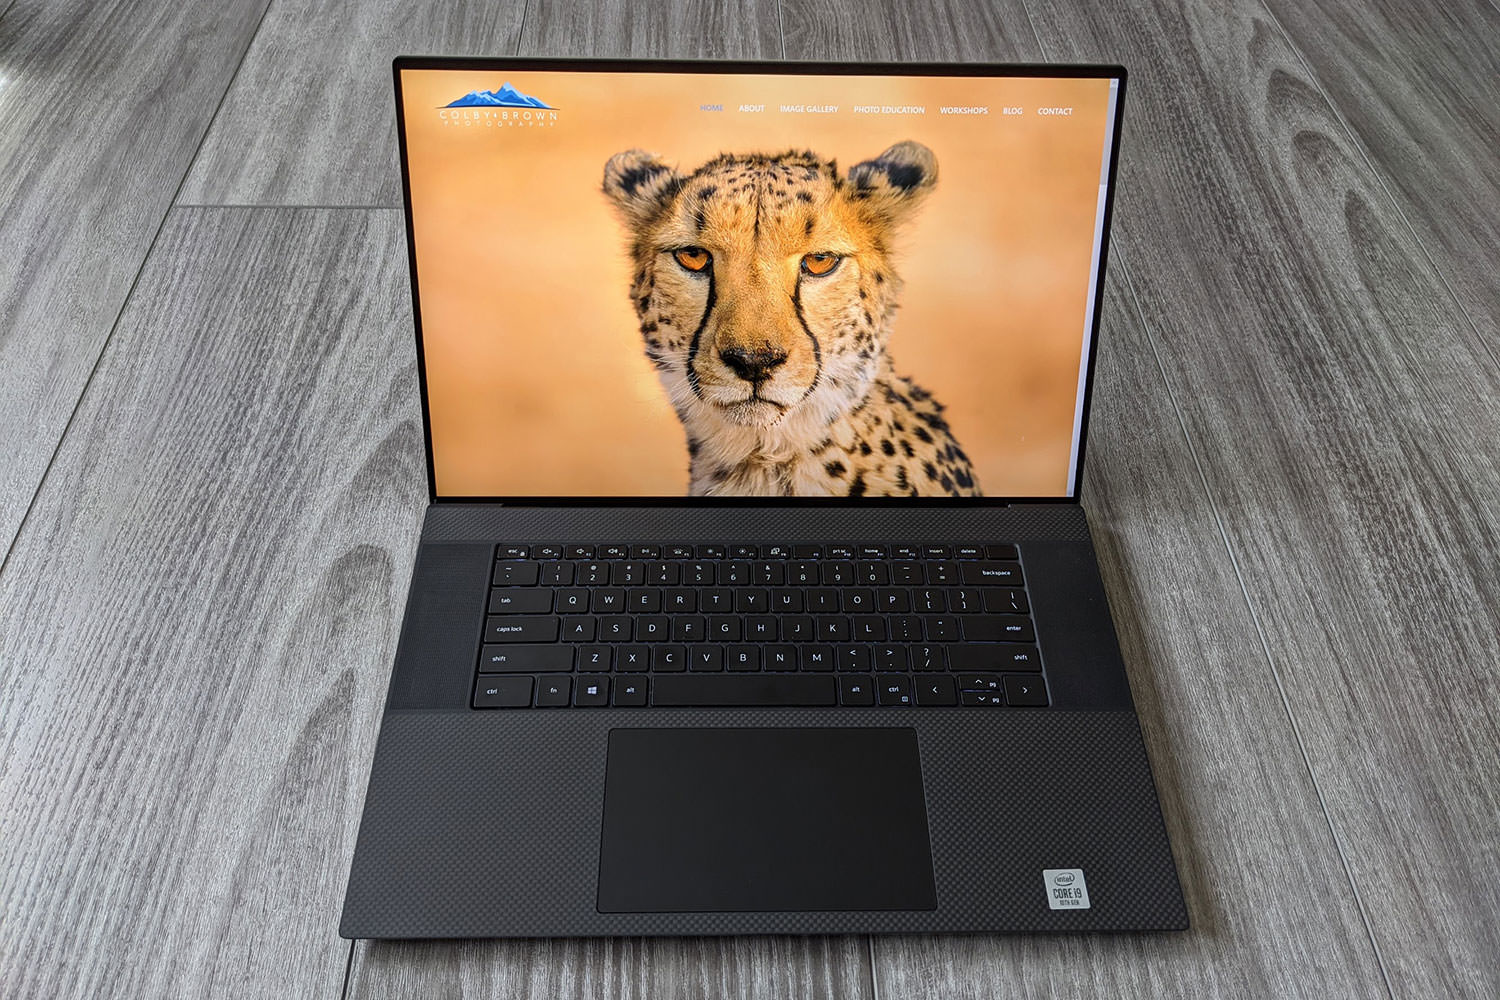 Dell XPS 17 Color Management - the XPS 15 and 17 laptops. Both of these laptops not only have discrete GPUs inside but wide color gamut support as well with their 4k infinity-edge displays